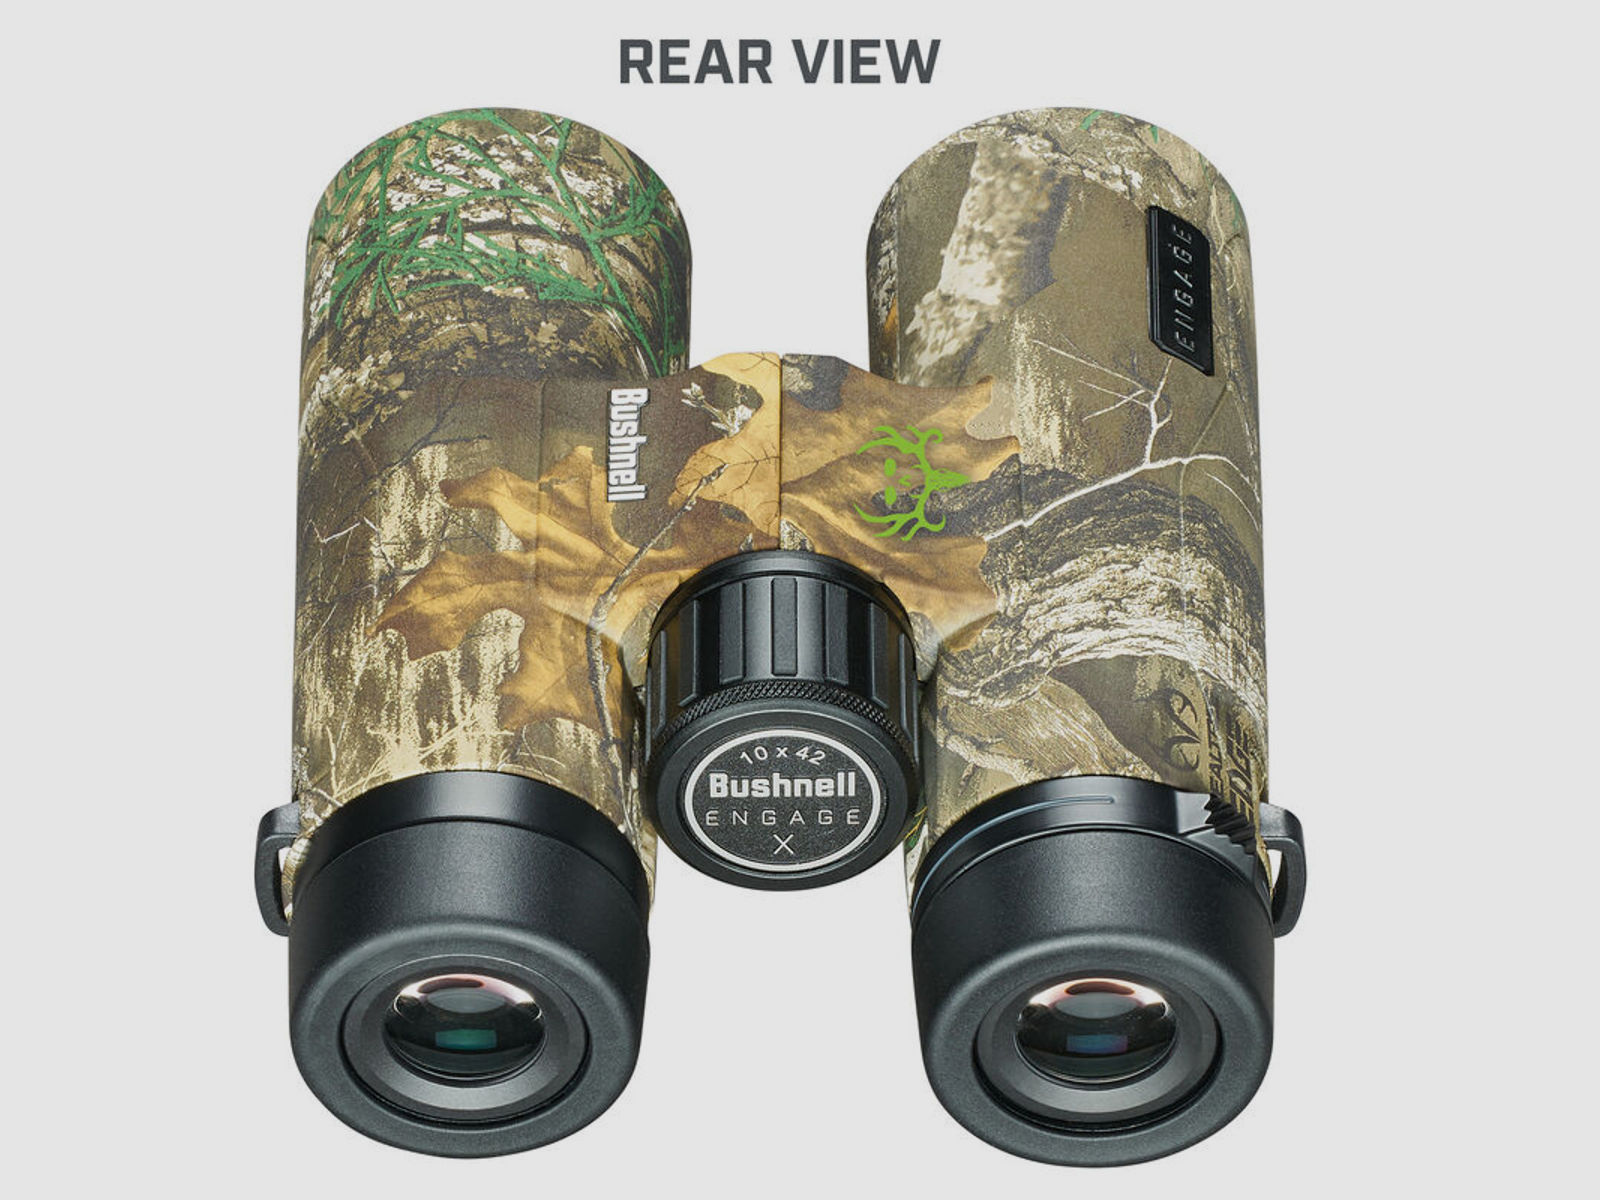 Bushnell Fernglas Engage 'X' 10x42mm, Real Tree, EDX, FMC, bleifrei